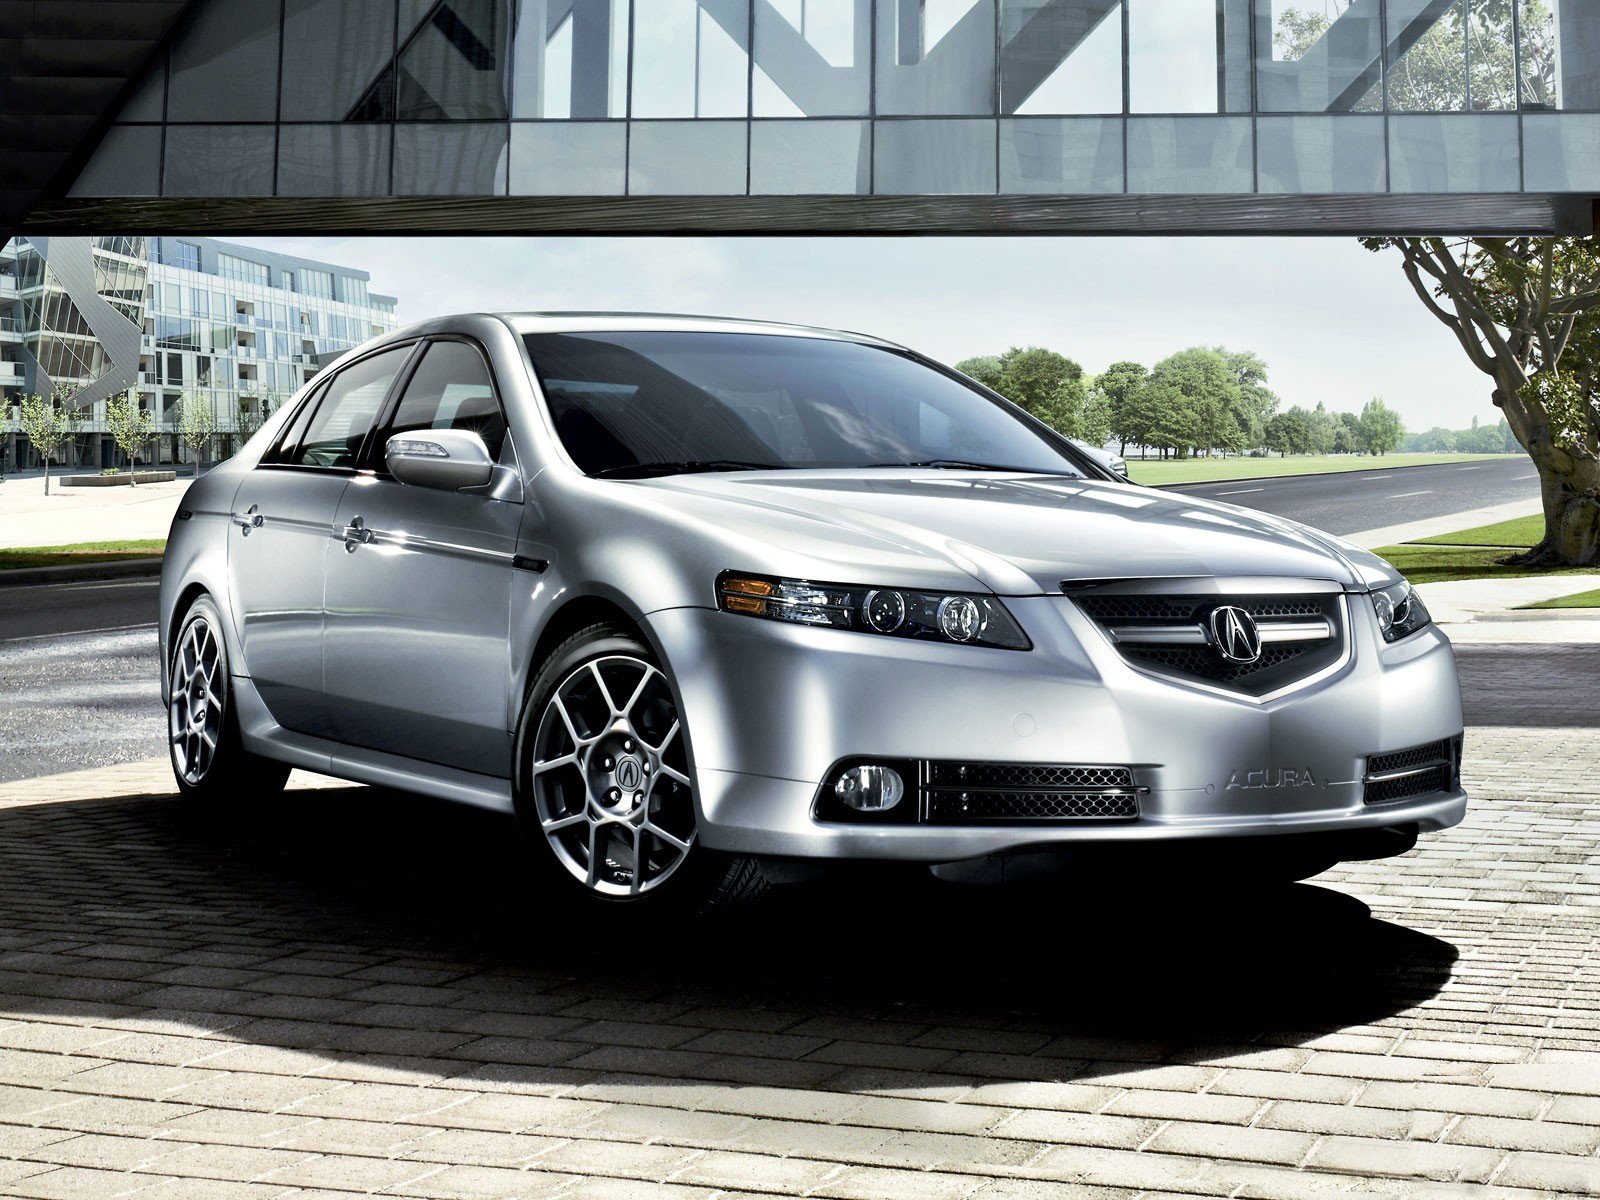 cars, Ride, Roads, Vehicles, Acura, Front, Angle, View Wallpaper